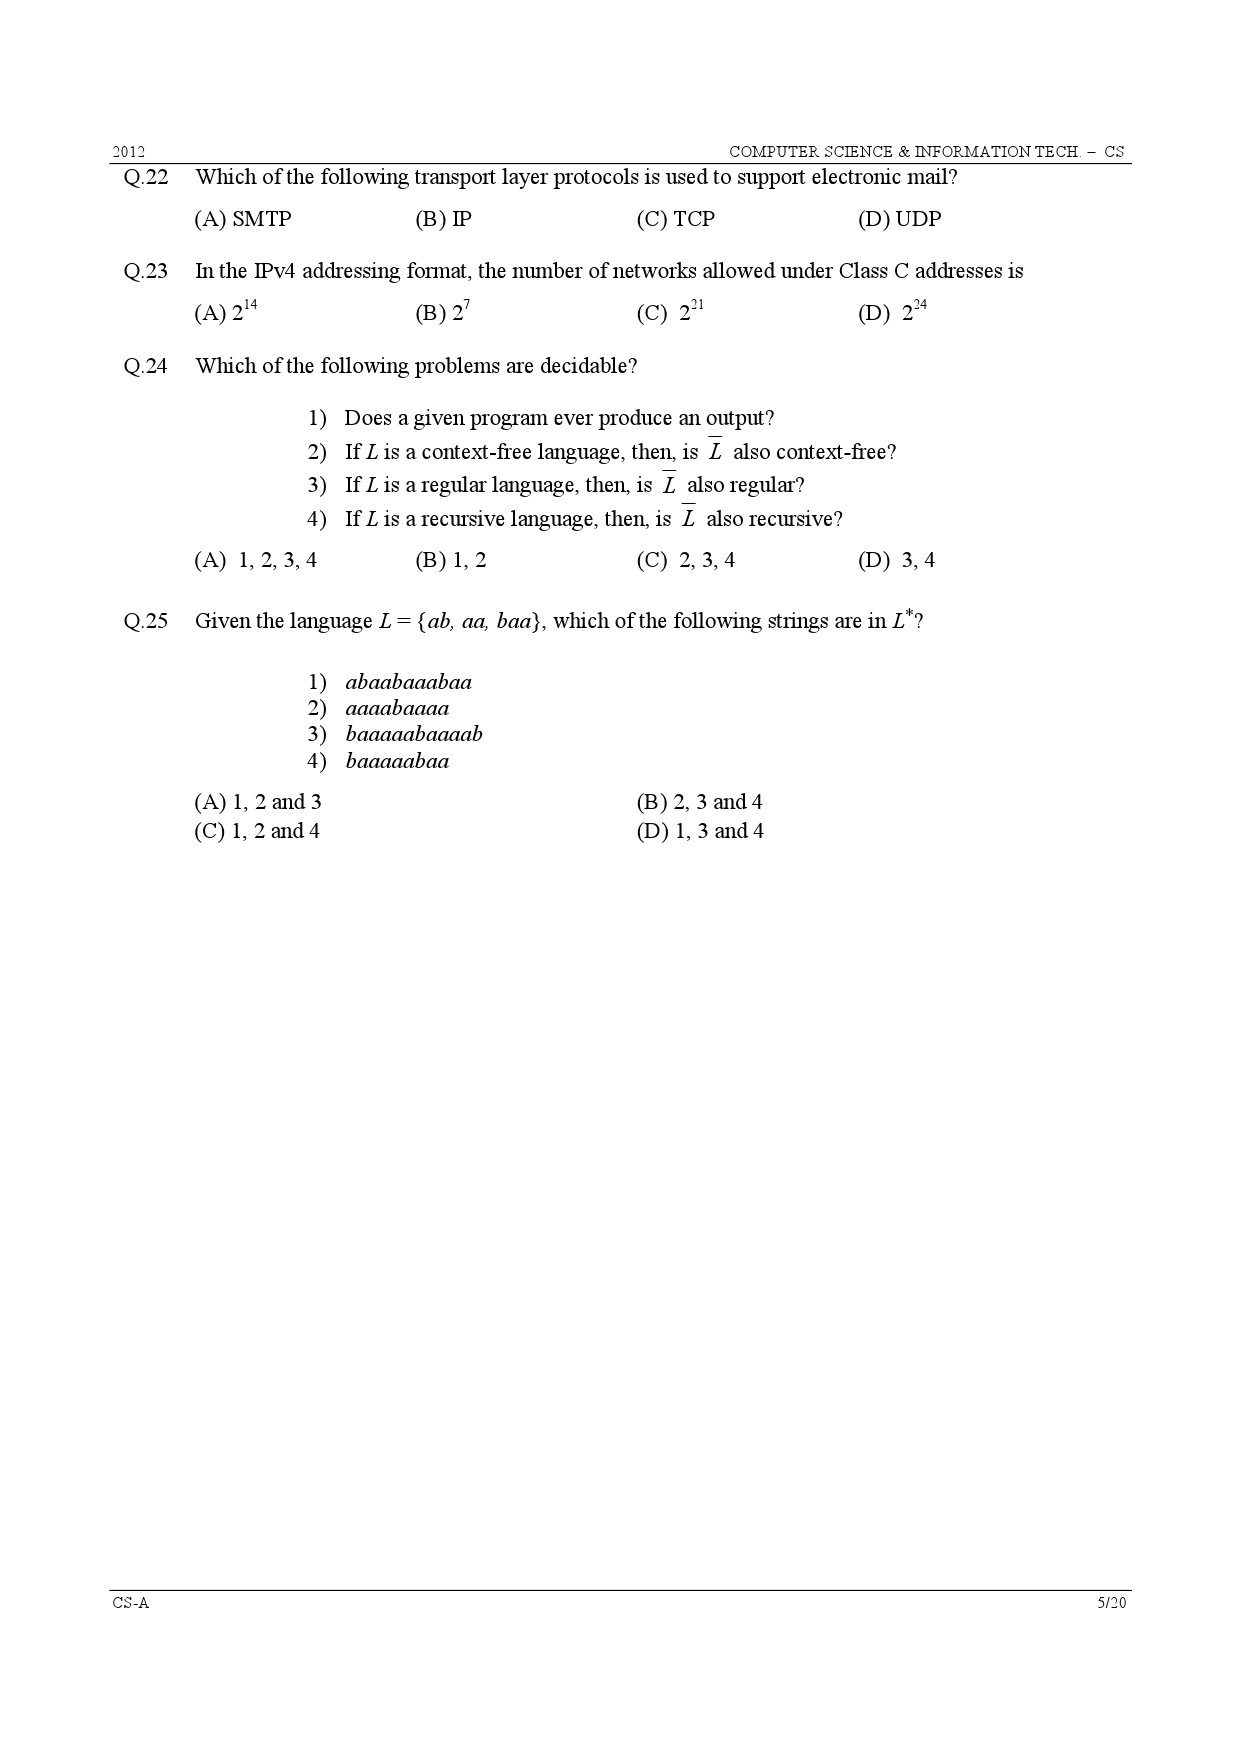 GATE Exam Question Paper 2012 Computer Science and Information Technology 5